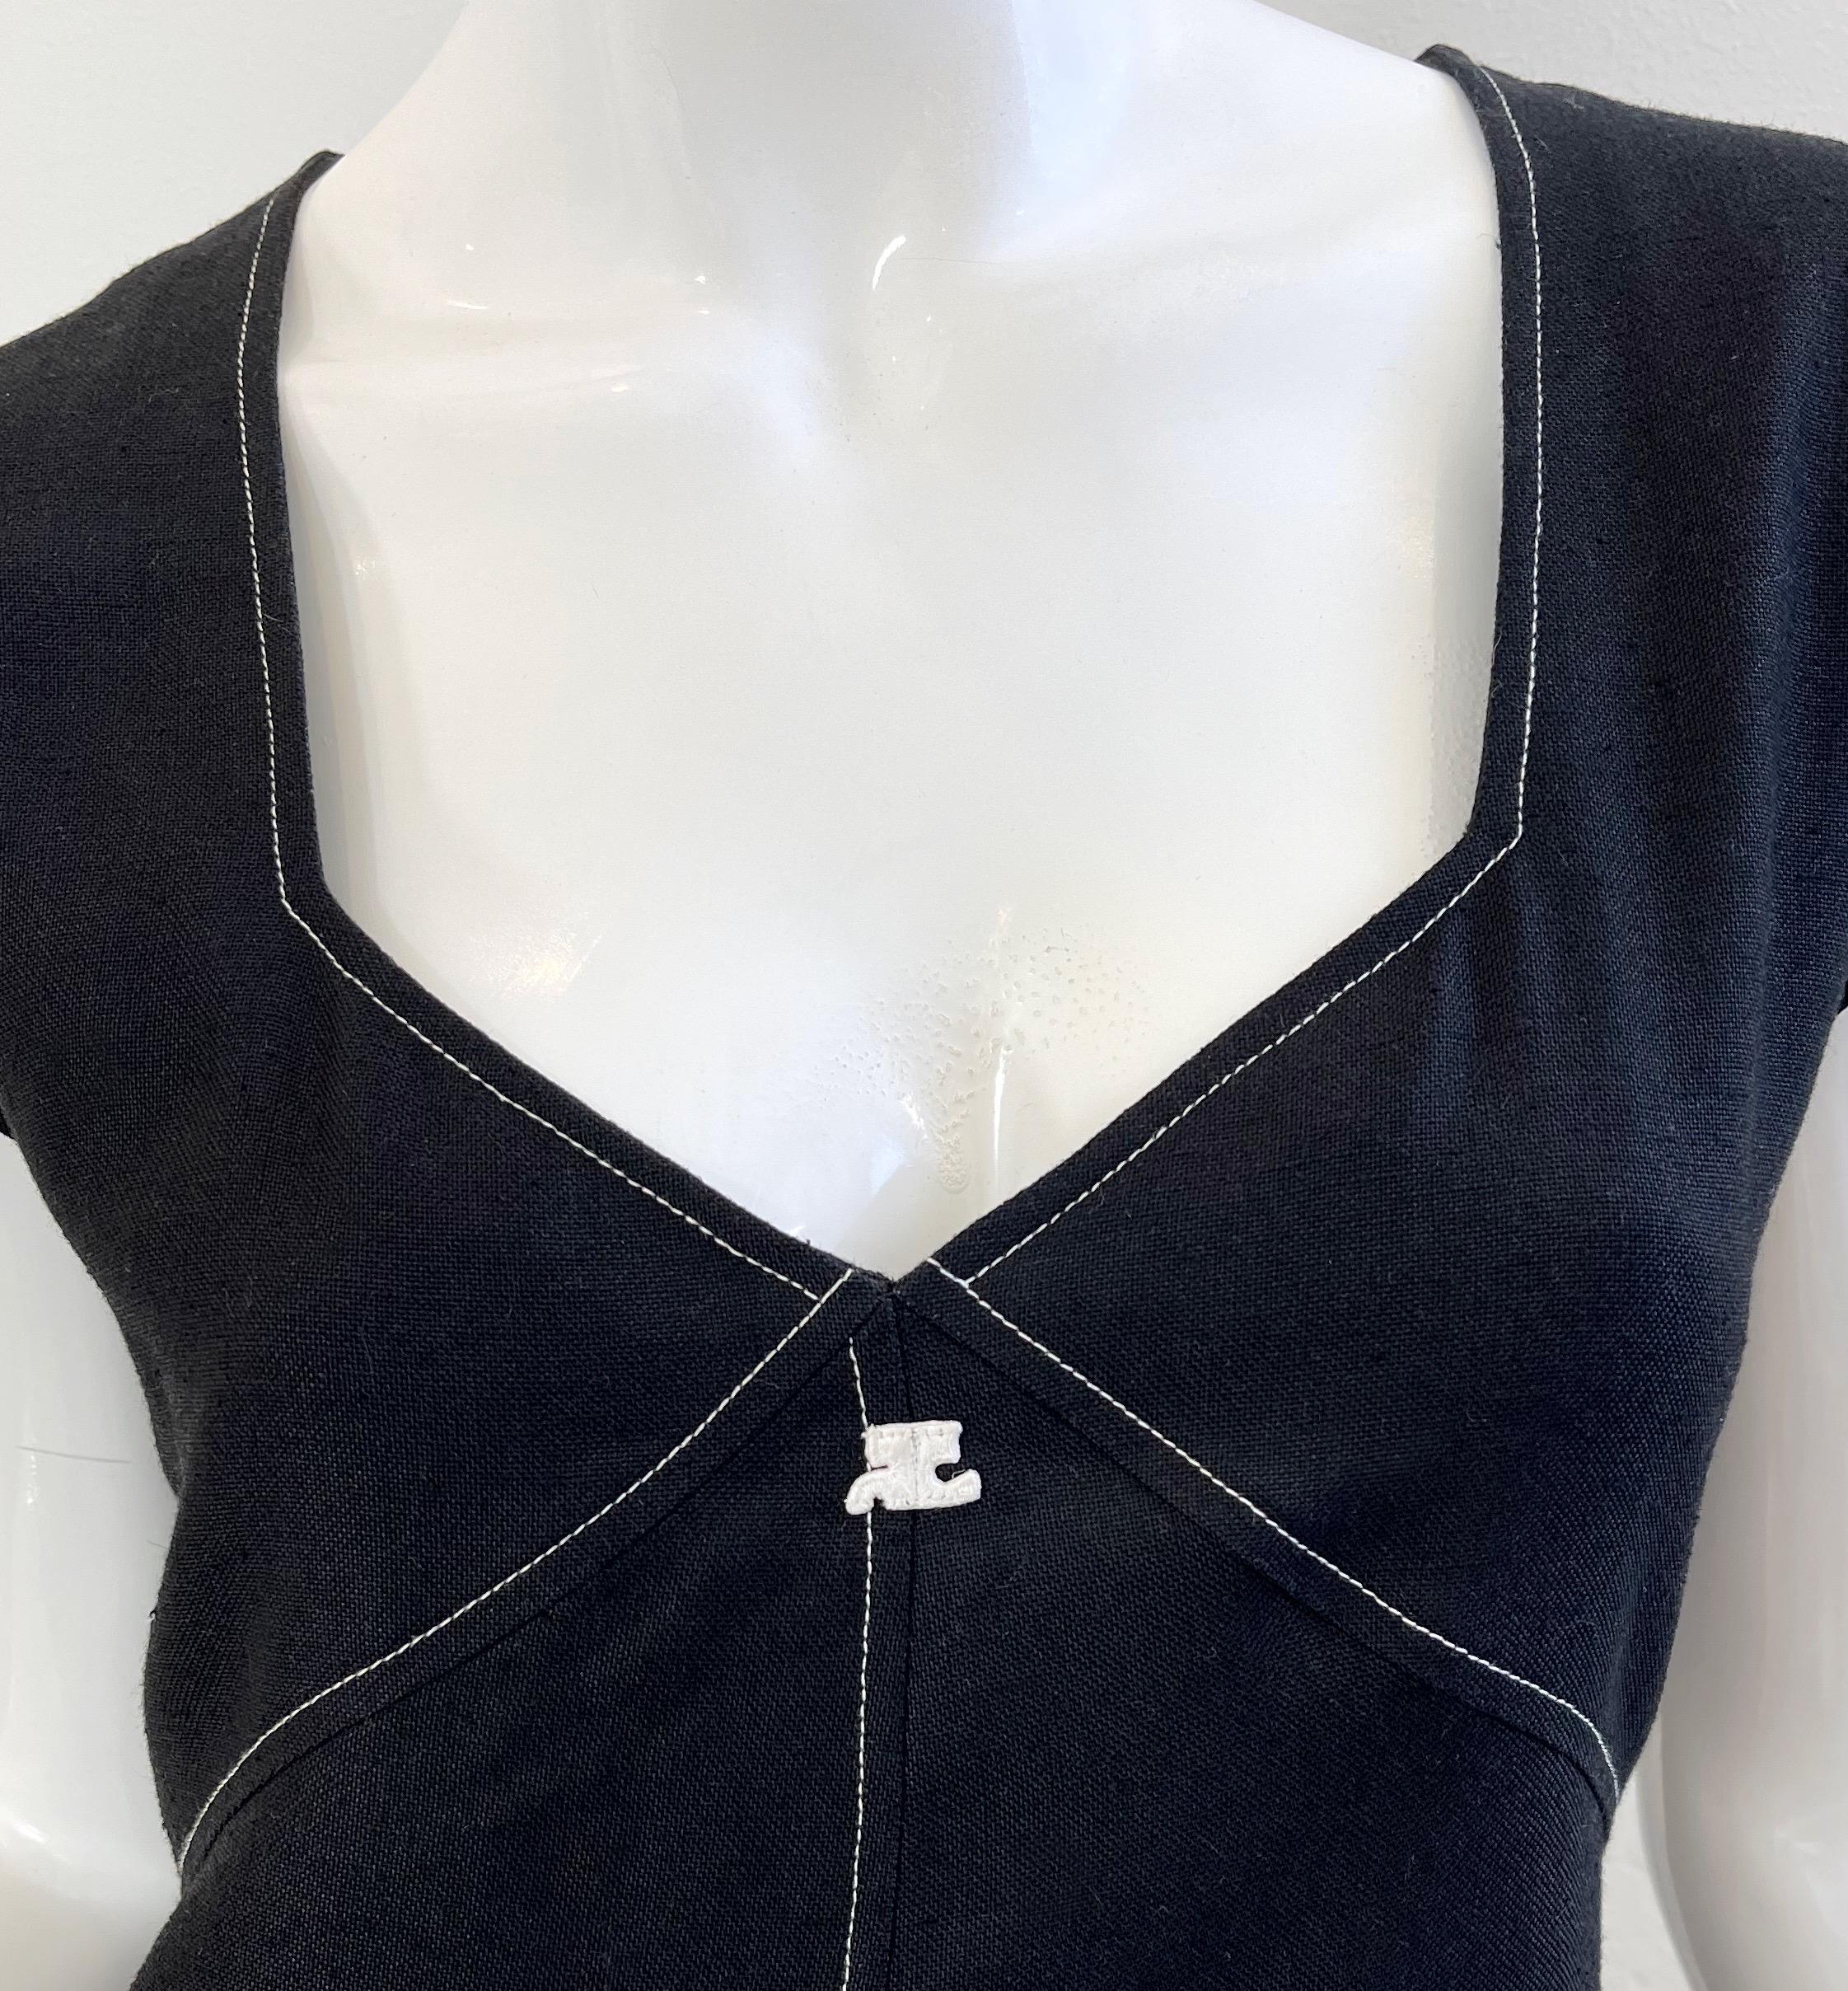 Vintage Courreges 1990s Does 1960s Black and White Size 38 / 6 90s Dress For Sale 1